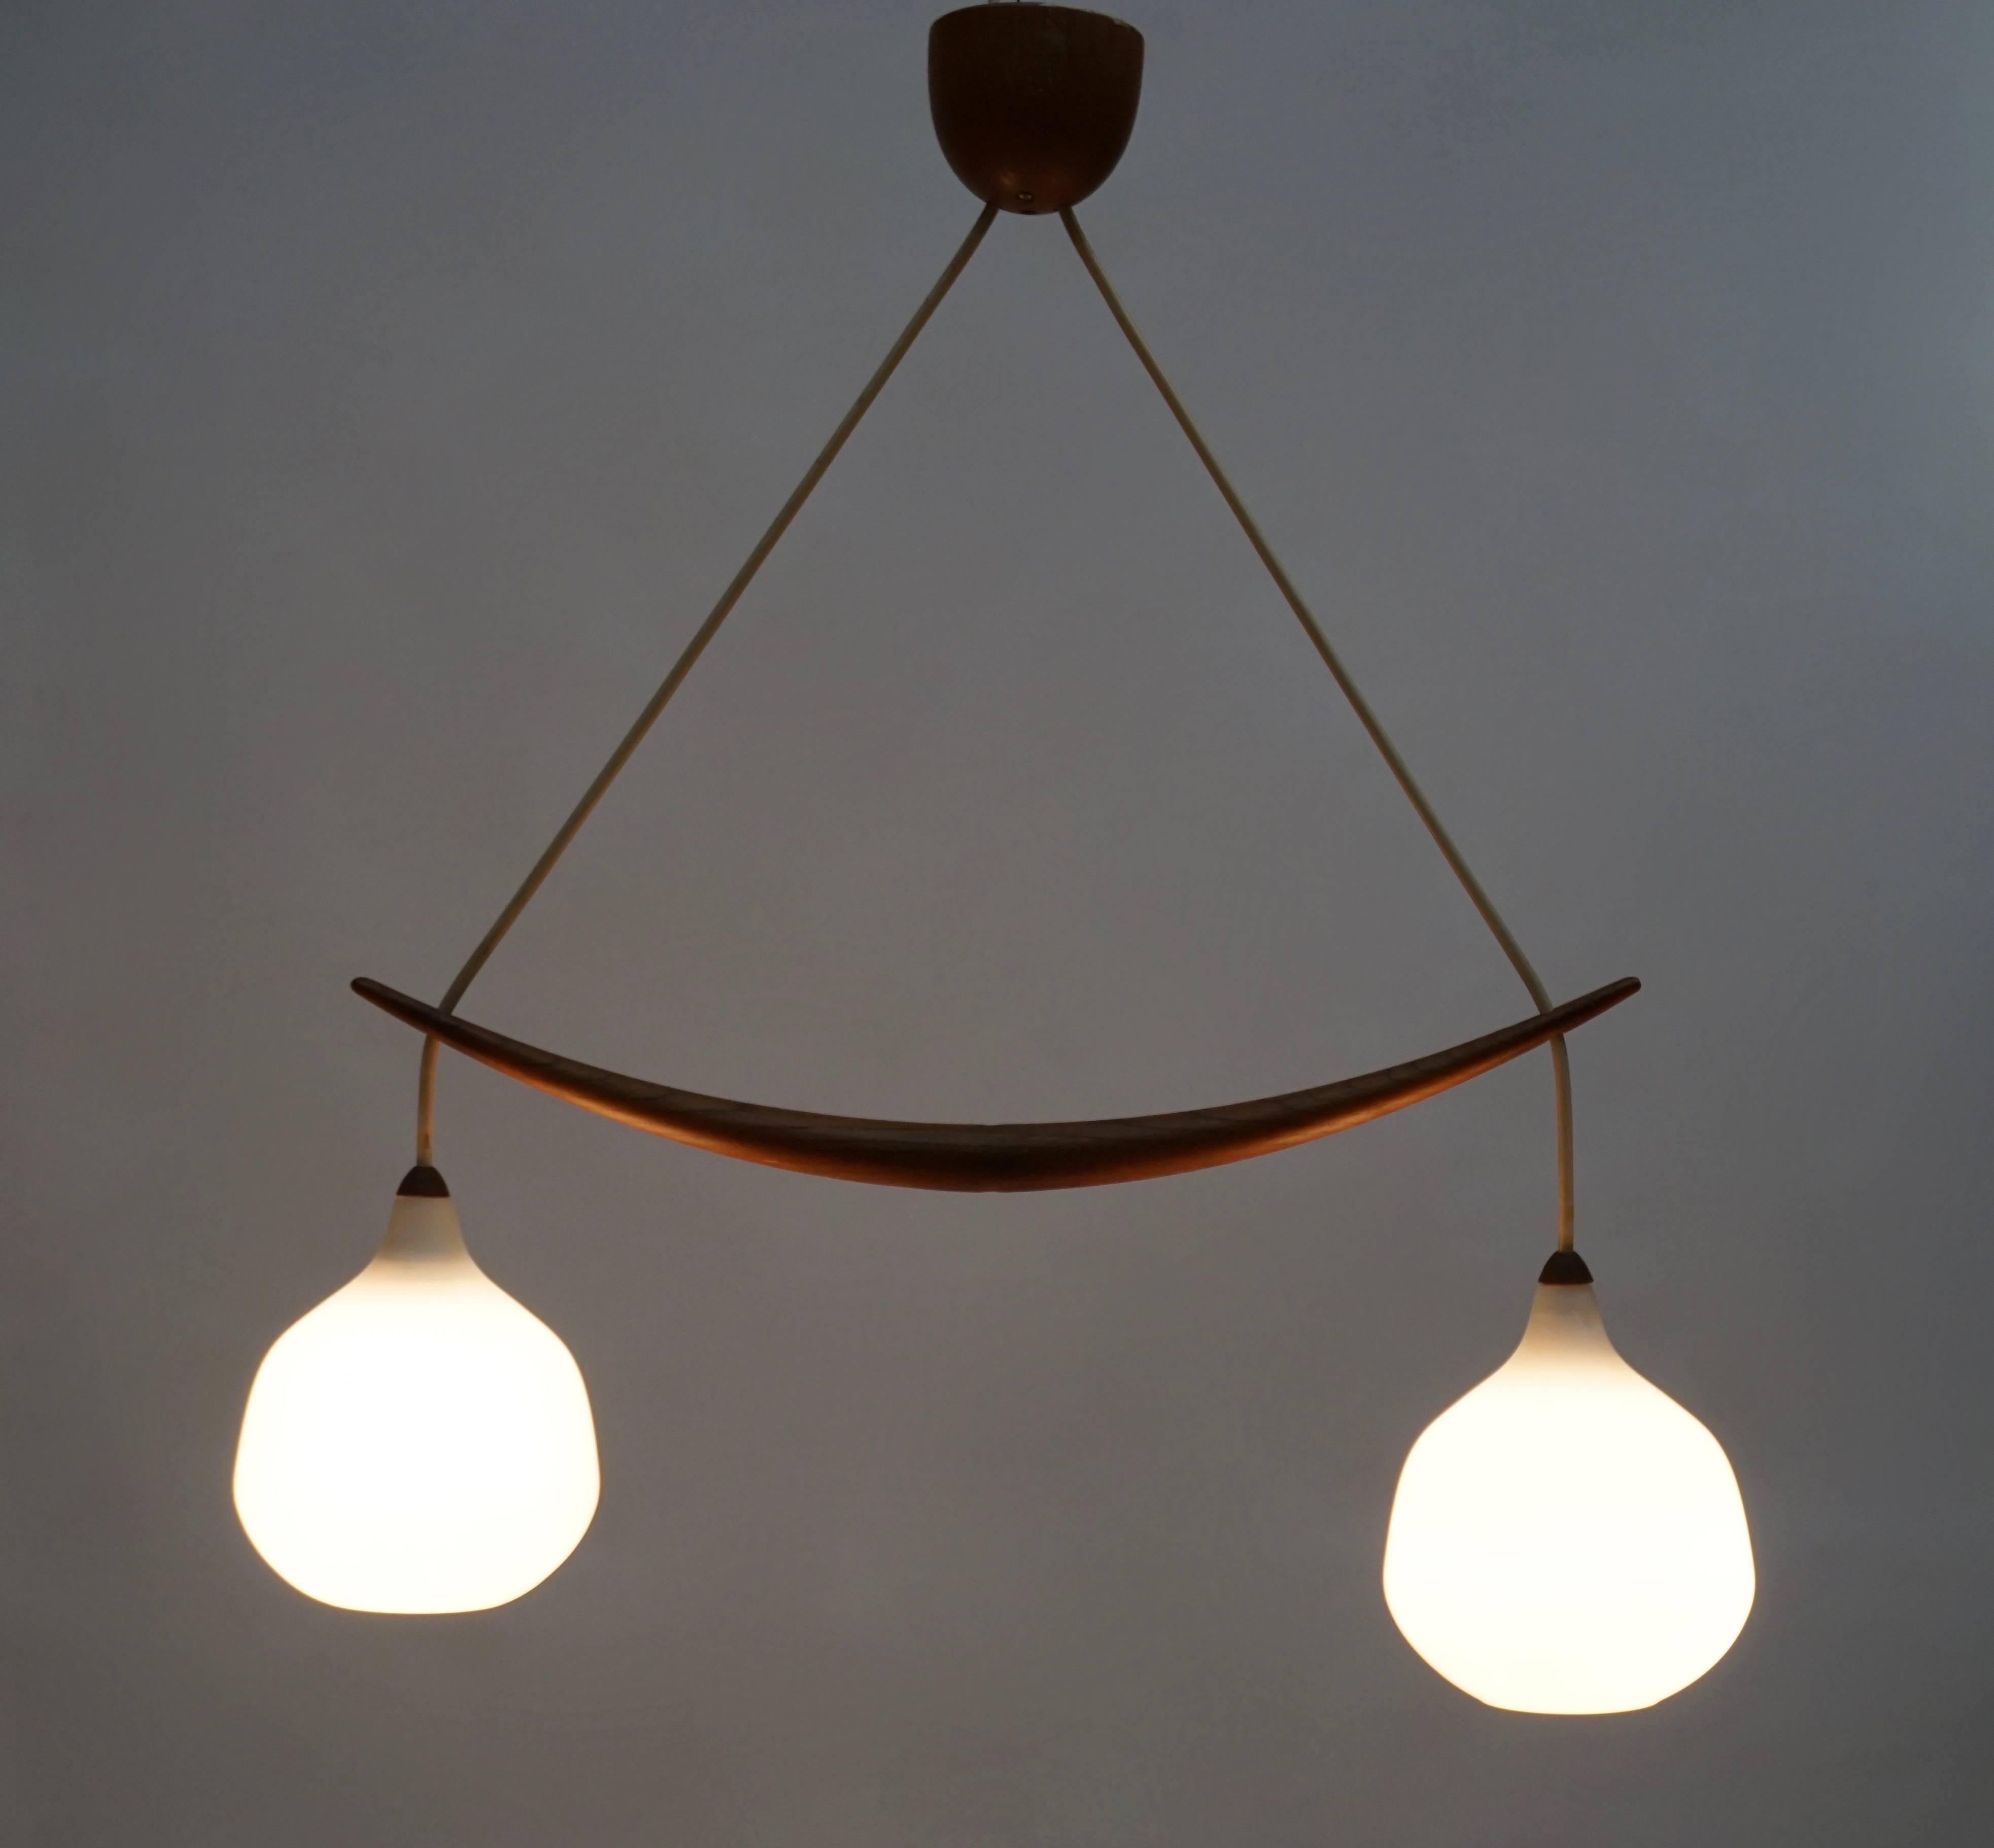 Pendant in oak and opaline glass. The lamp features two hanging glass spheres, divided by a carefully carved oak stick.
Measures: Height 65 cm.
Width 75 cm.